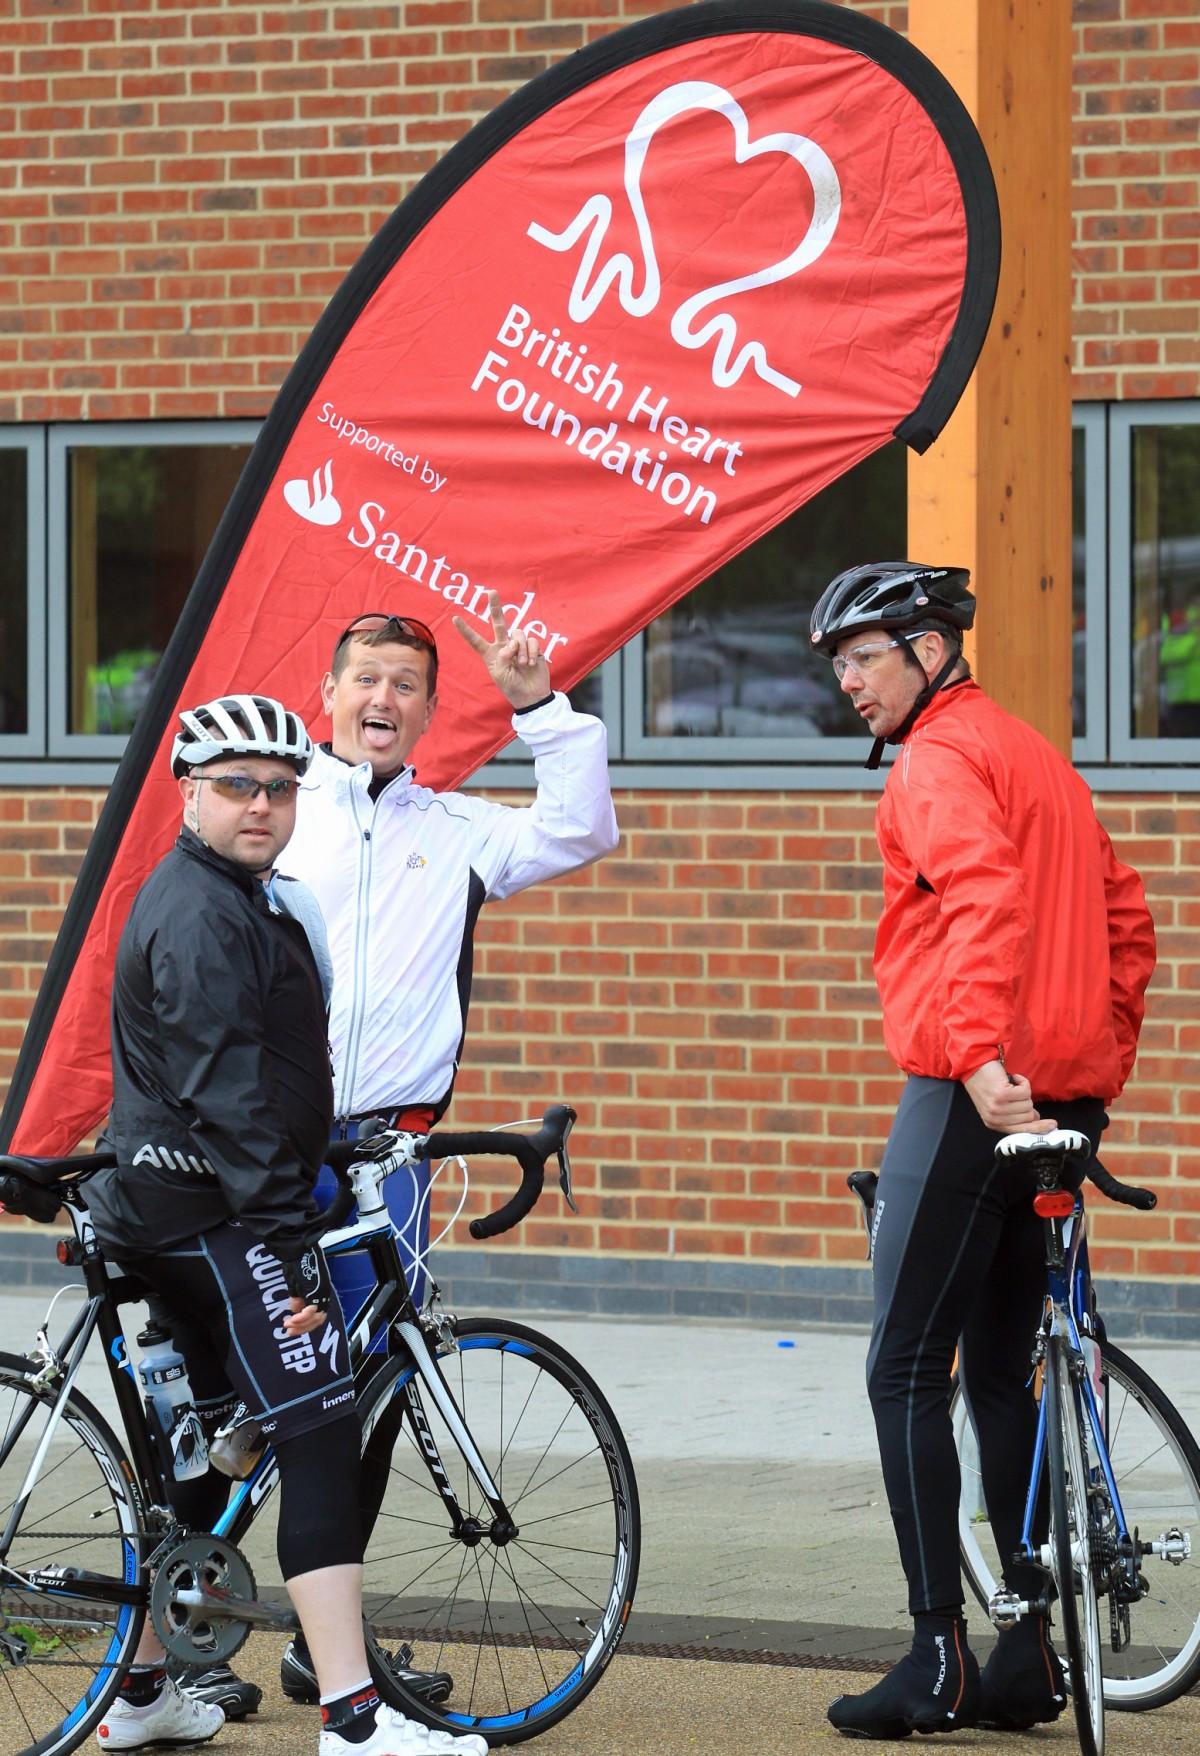 All our pictures of the British Heart Foundation Dorset Bike Ride 2014